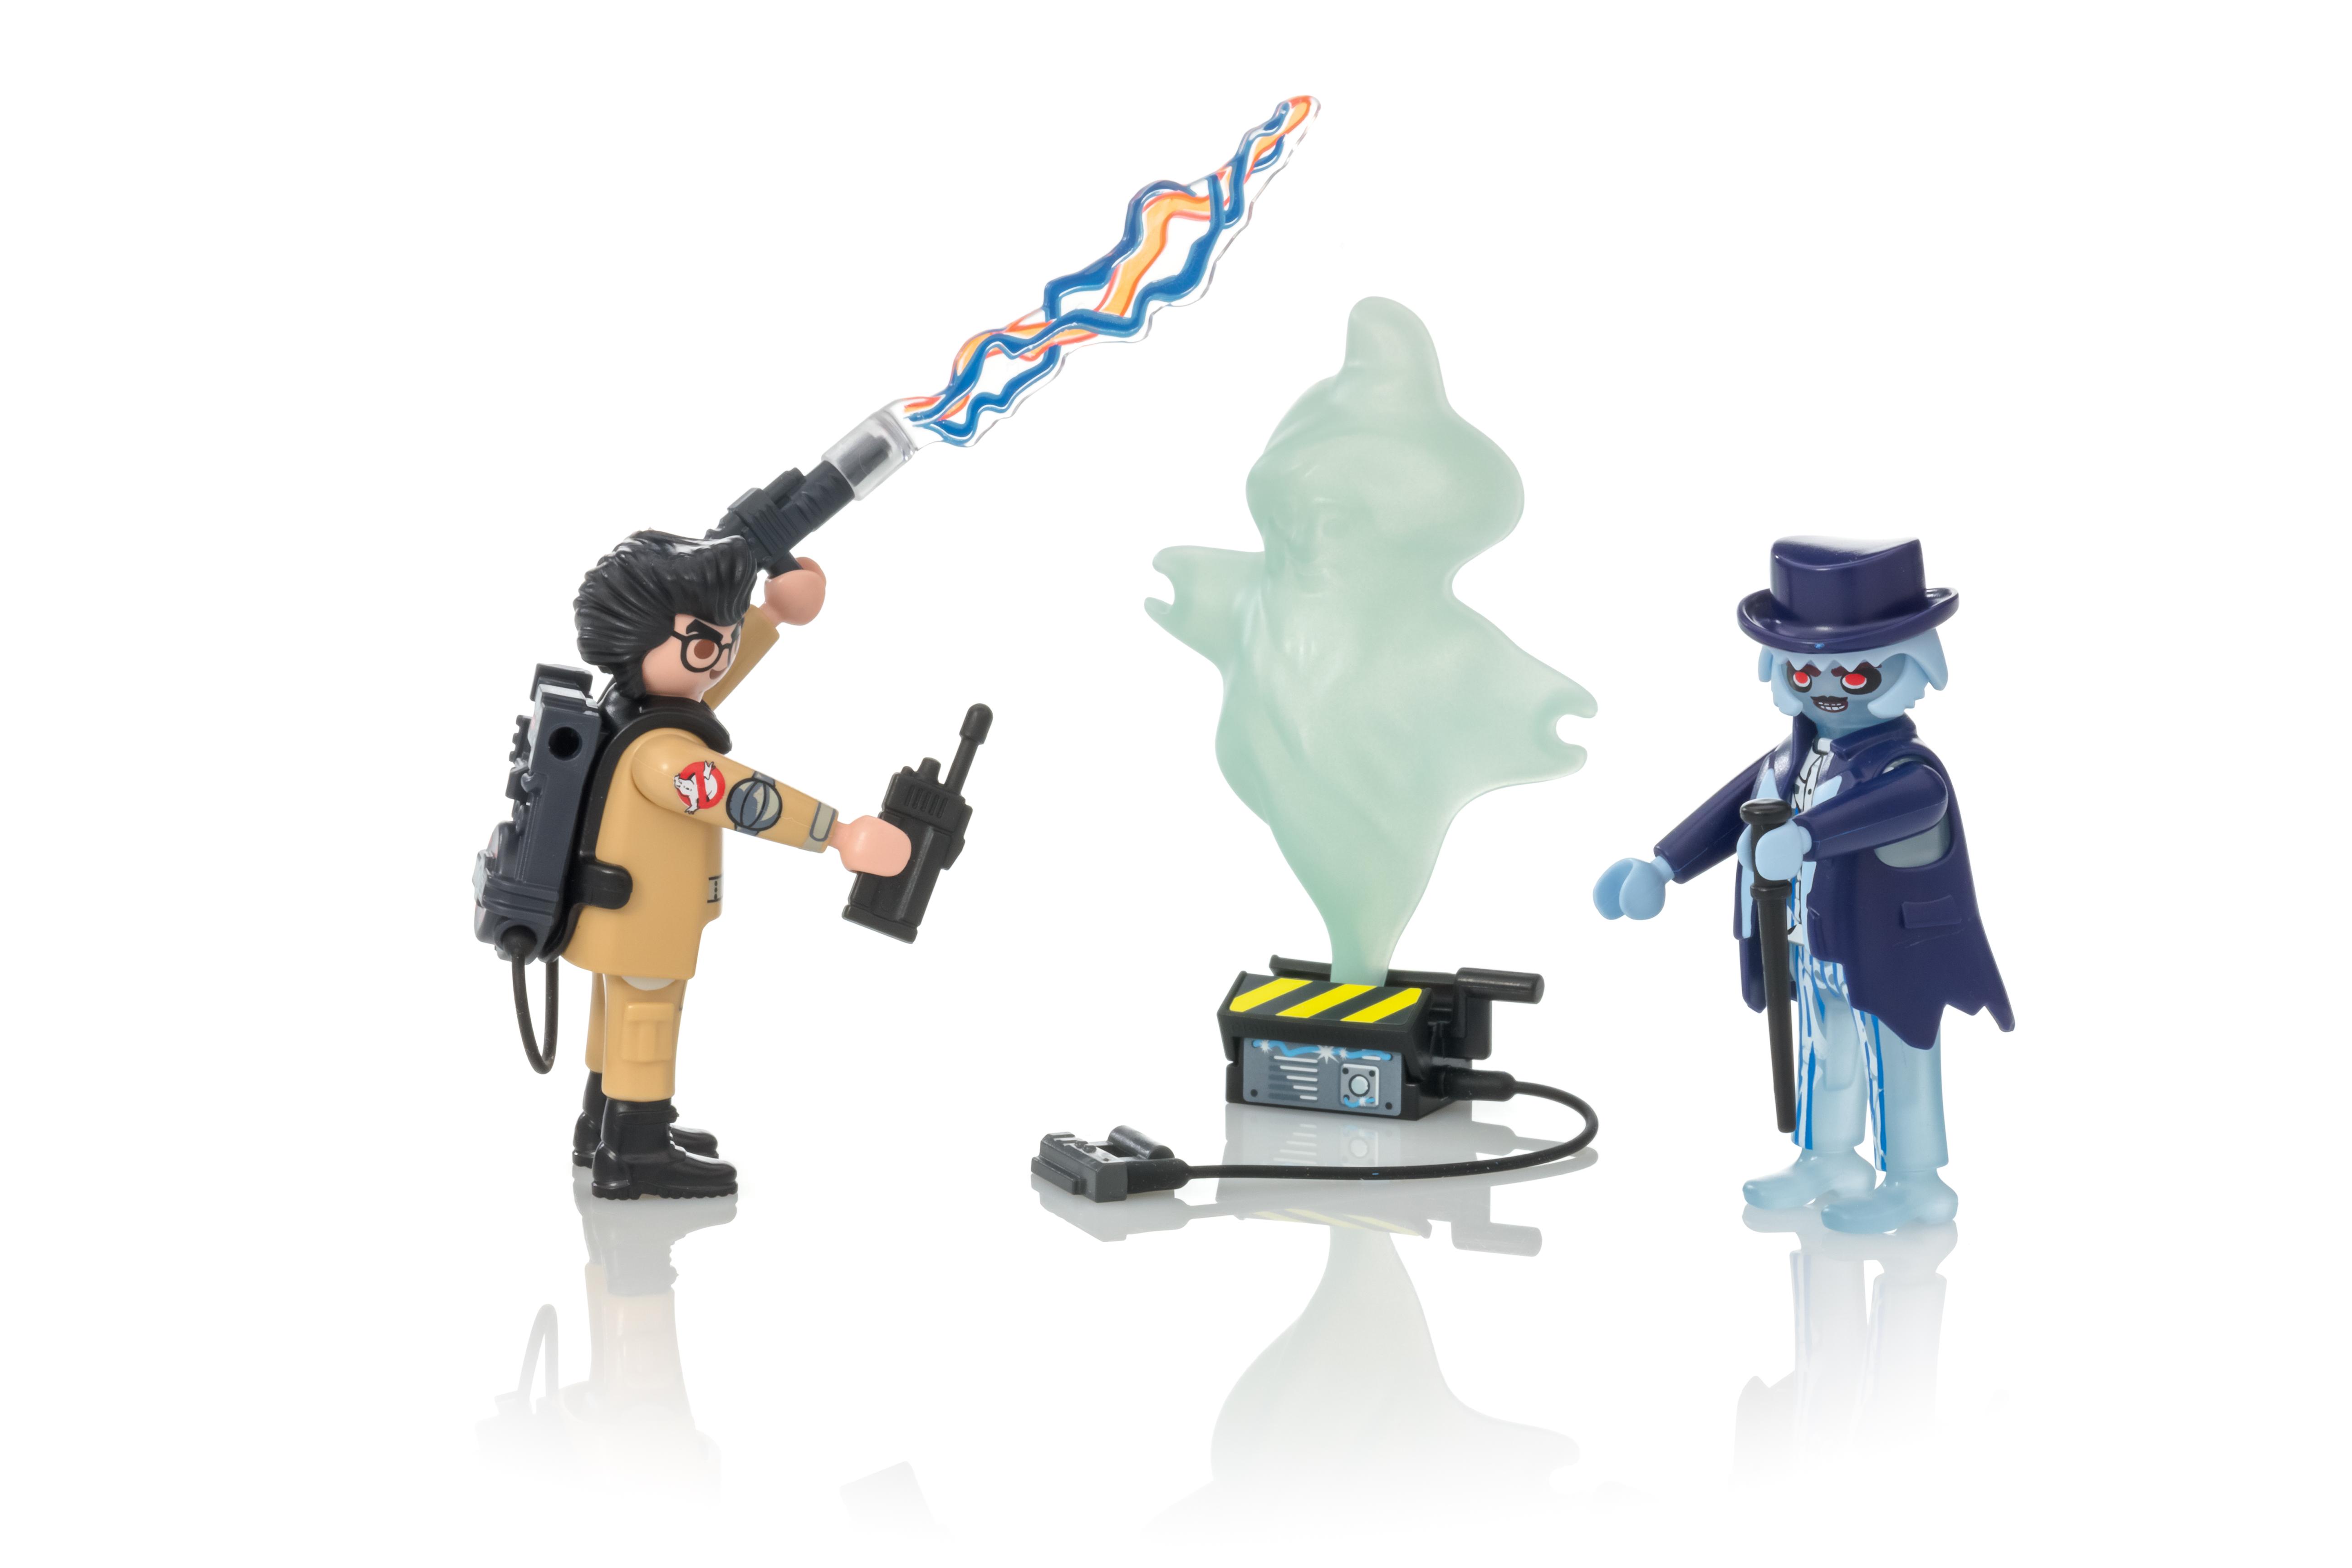 PLAYMOBIL GHOSTBUSTERS #9224 Spengler and Ghost New Factory Sealed 